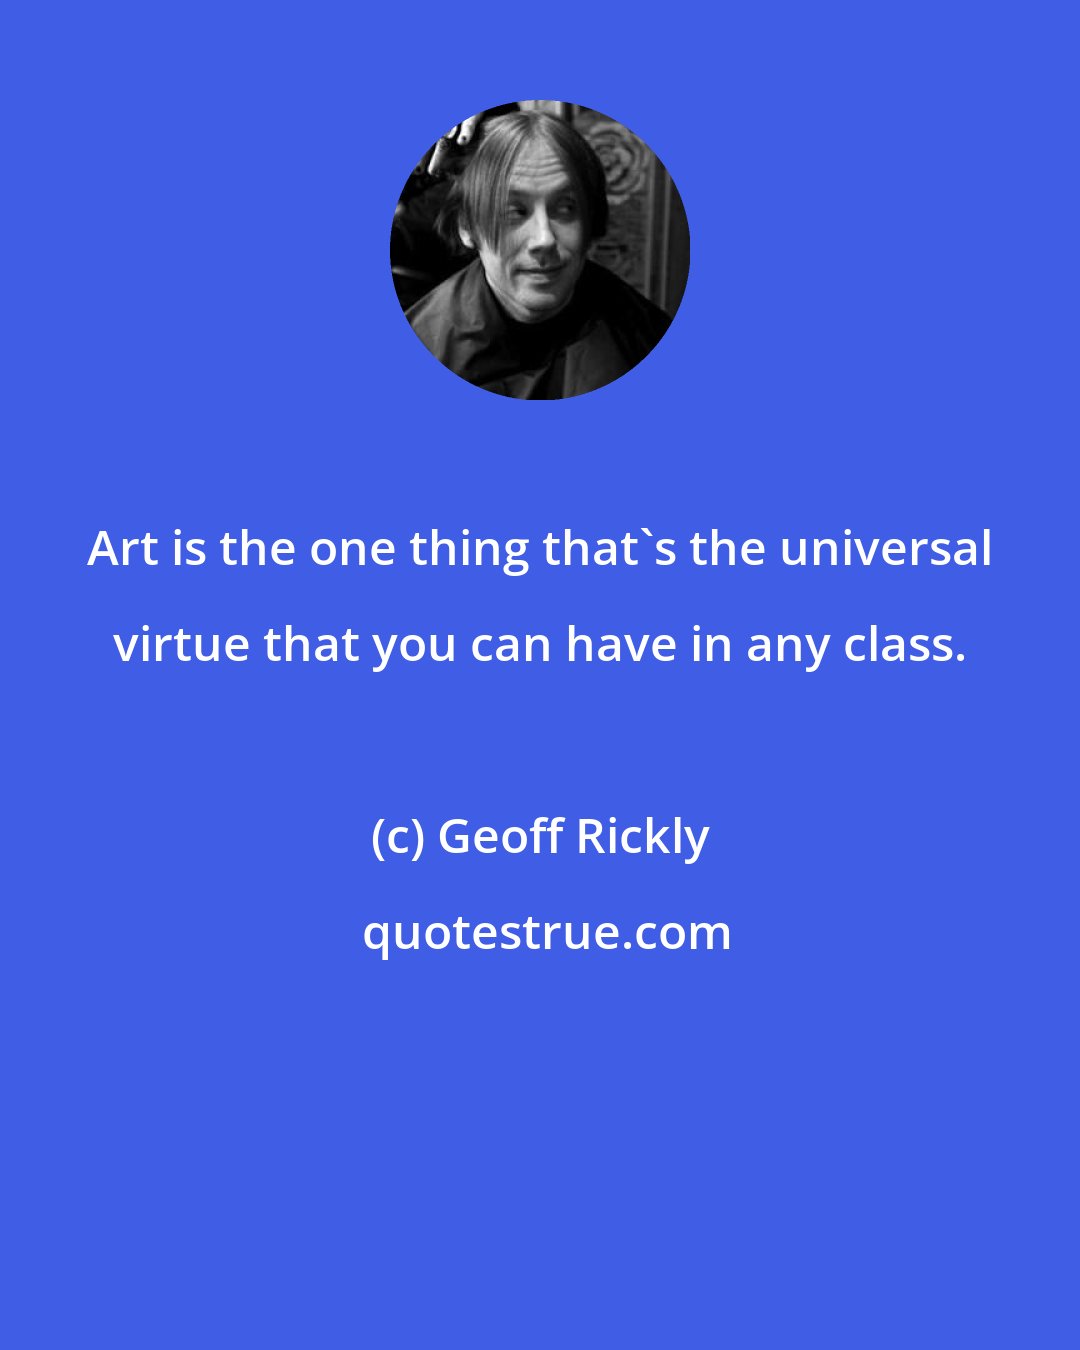 Geoff Rickly: Art is the one thing that's the universal virtue that you can have in any class.